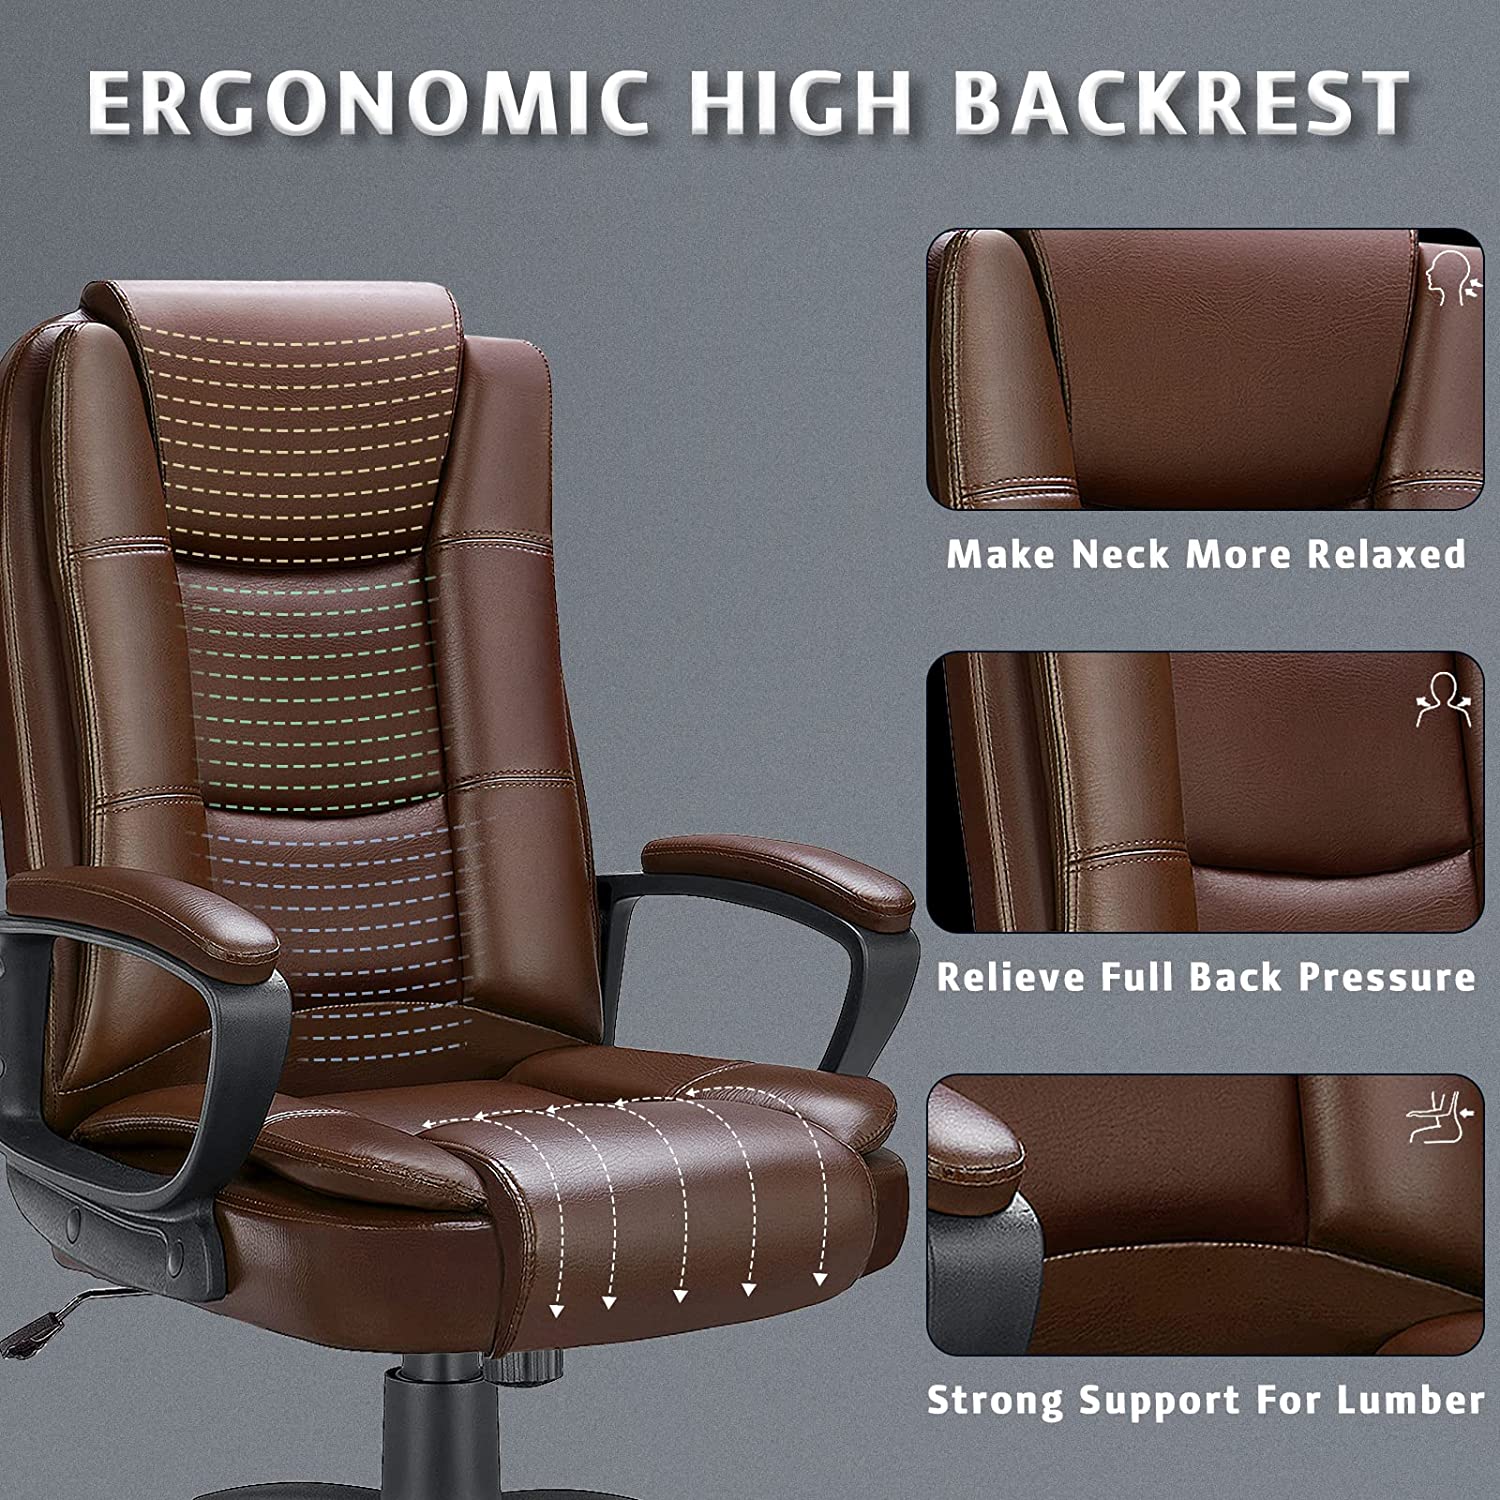 Waleaf Home Office Chair, 400LBS 8Hours Heavy Duty Design, Ergonomic High Back Cushion Lumbar Back Support, Computer Desk Chair, Big and Tall Chair for Work - image 3 of 7